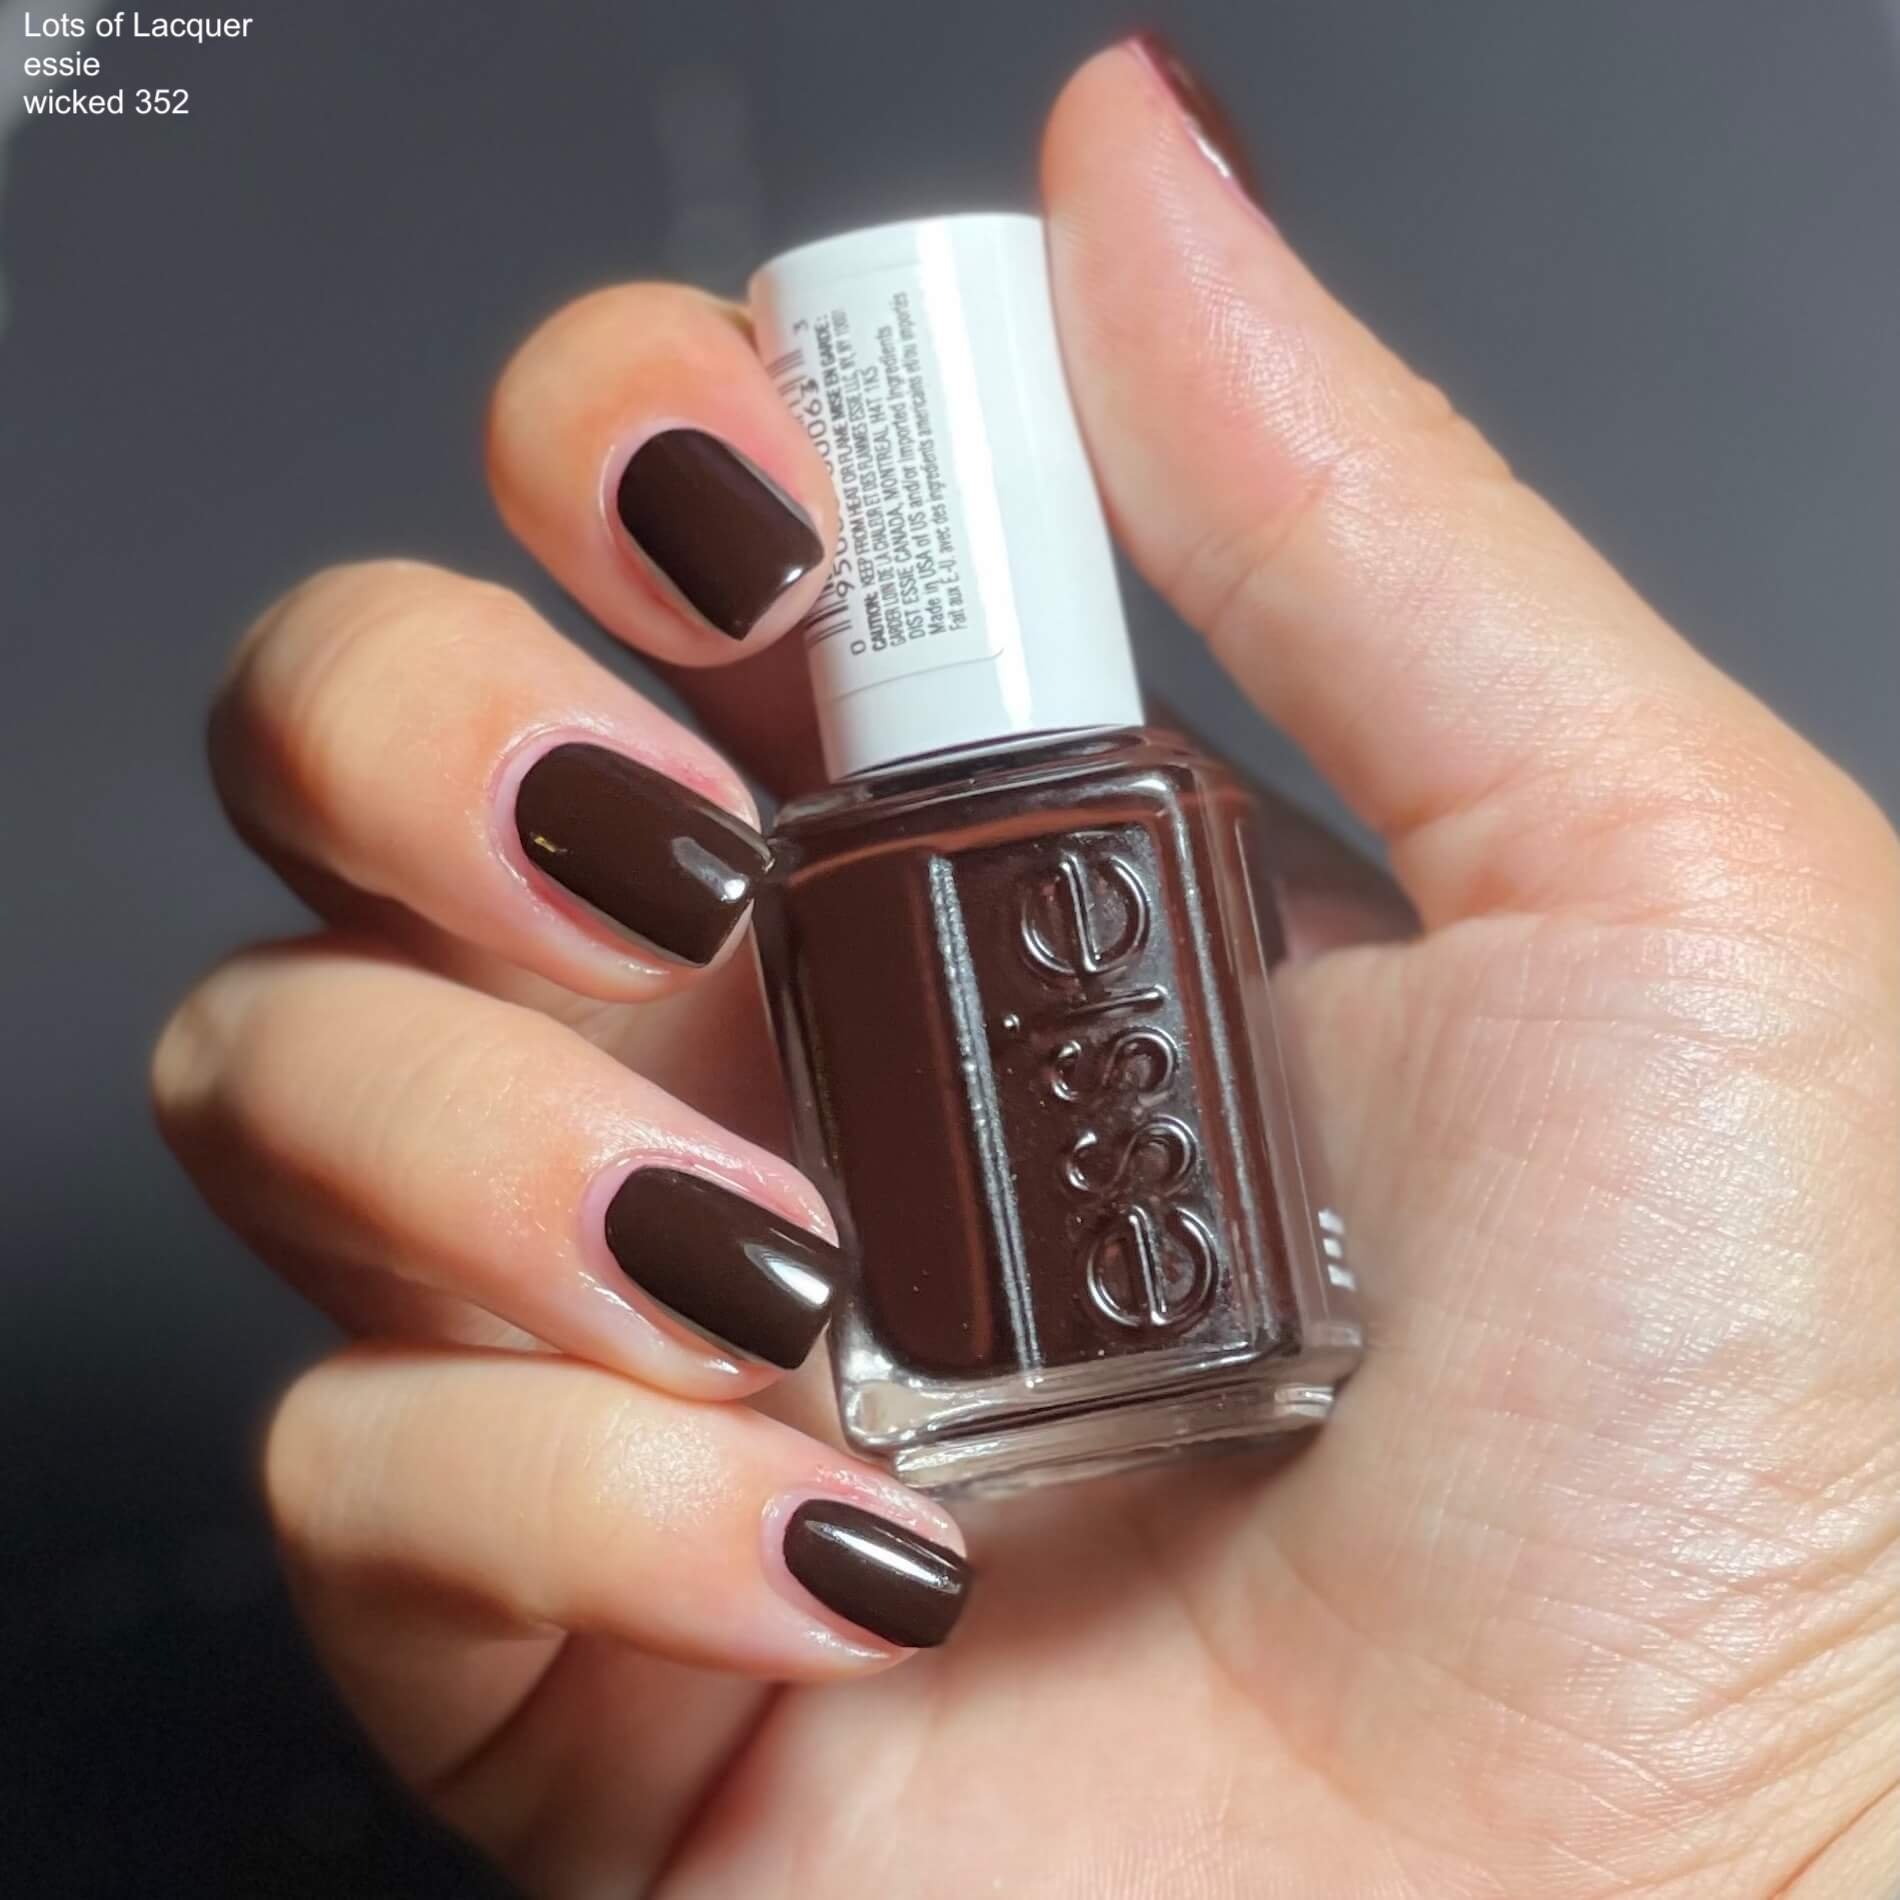 Nicole by OPI and DOVE Dark Chocolate Nail Polish Swatches & Sweepstakes  Info! - Blushing Noir